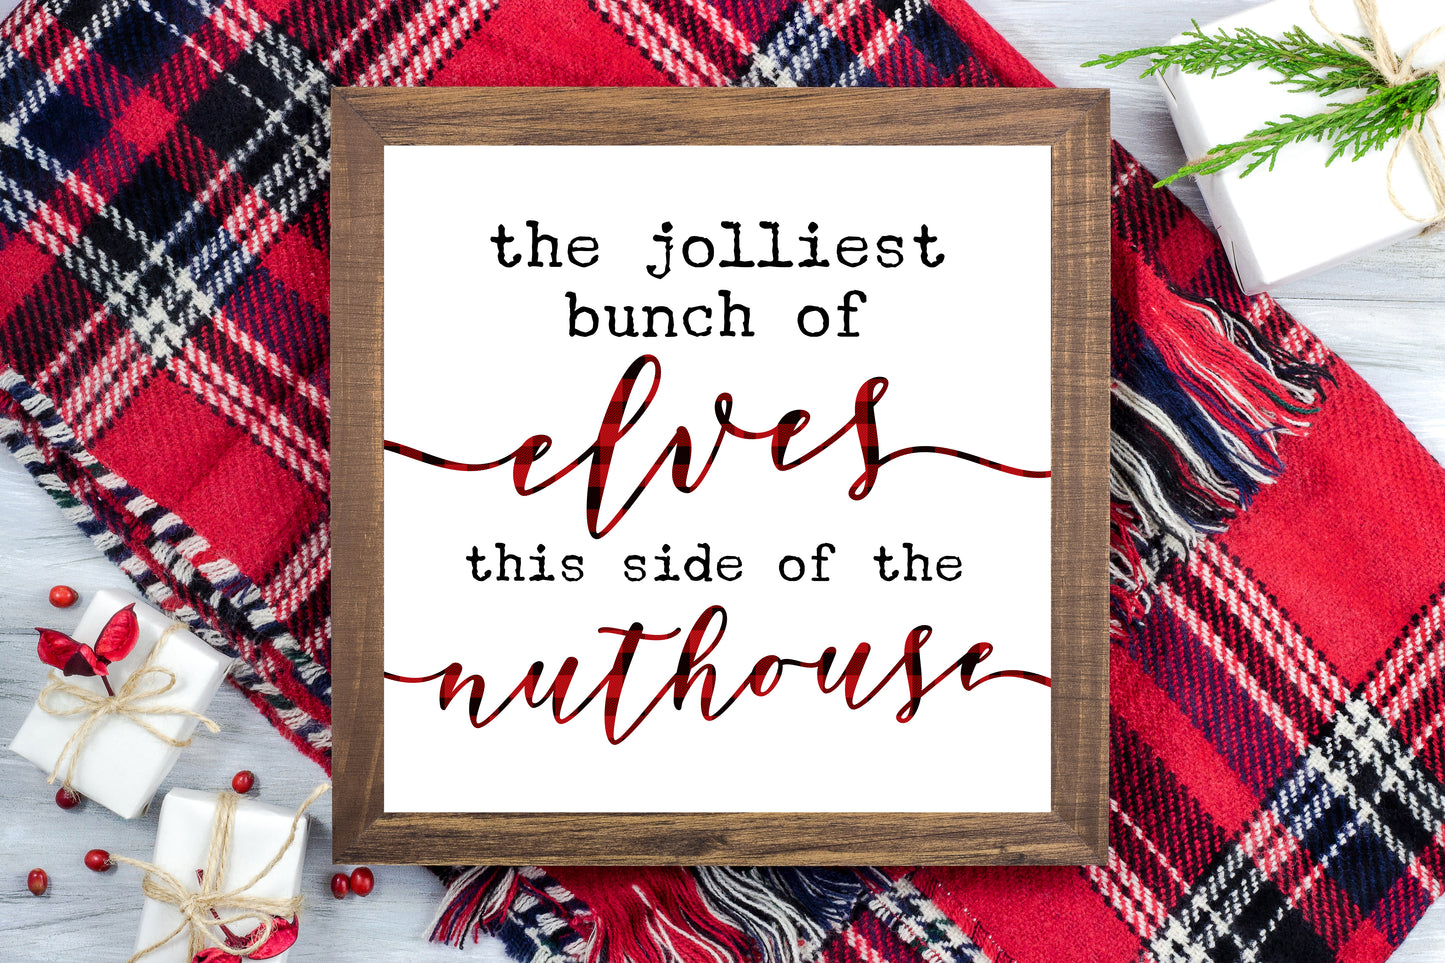 Jolliest bunch of elves this side of the nuthouse - Funny Christmas Decor Printable Sign Farmhouse Style  - Digital File